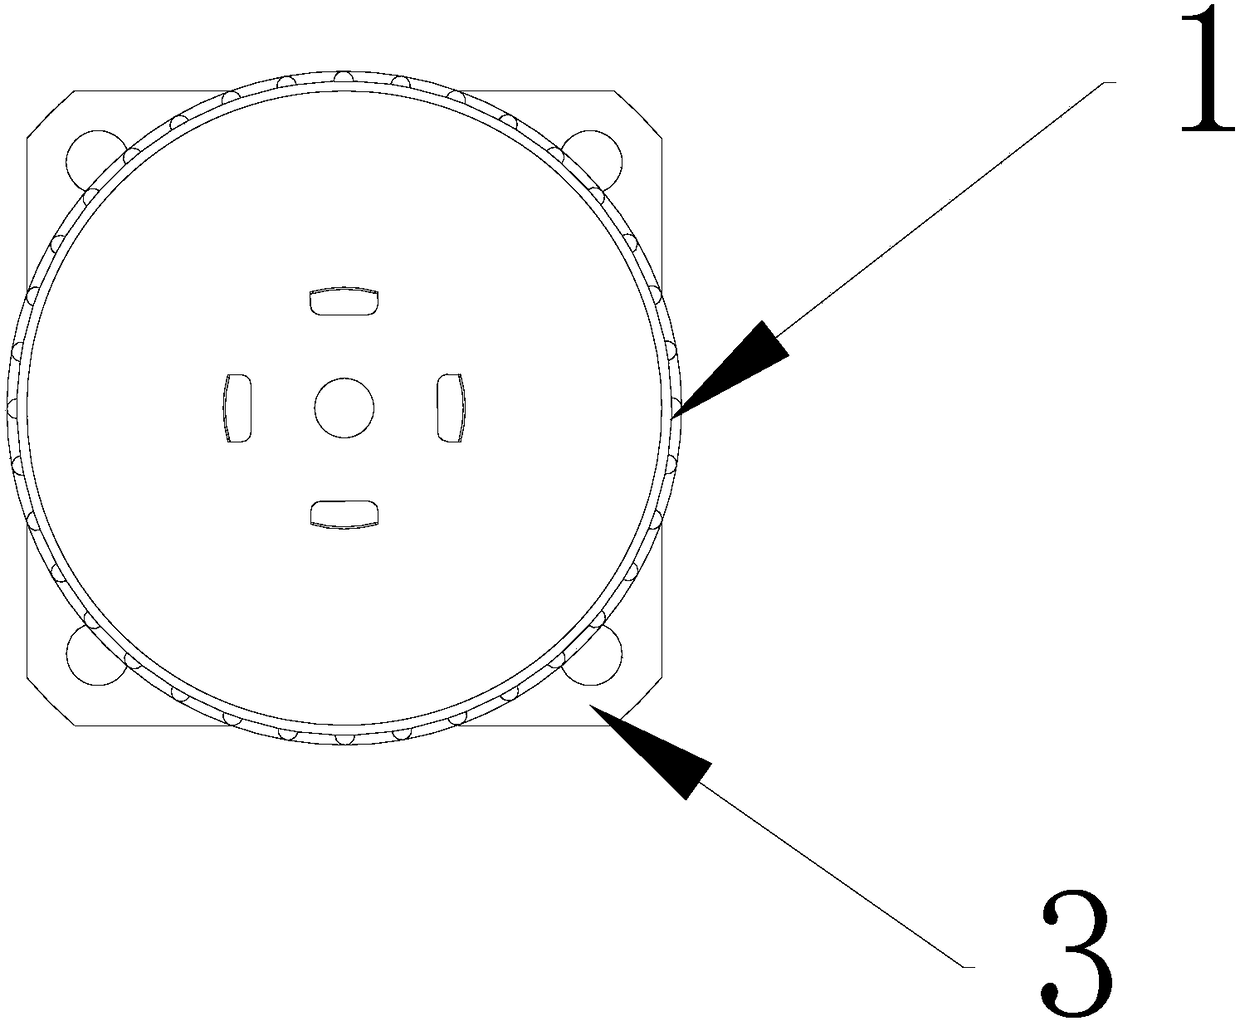 A new type of manual cap screwing mechanism with self-locking function